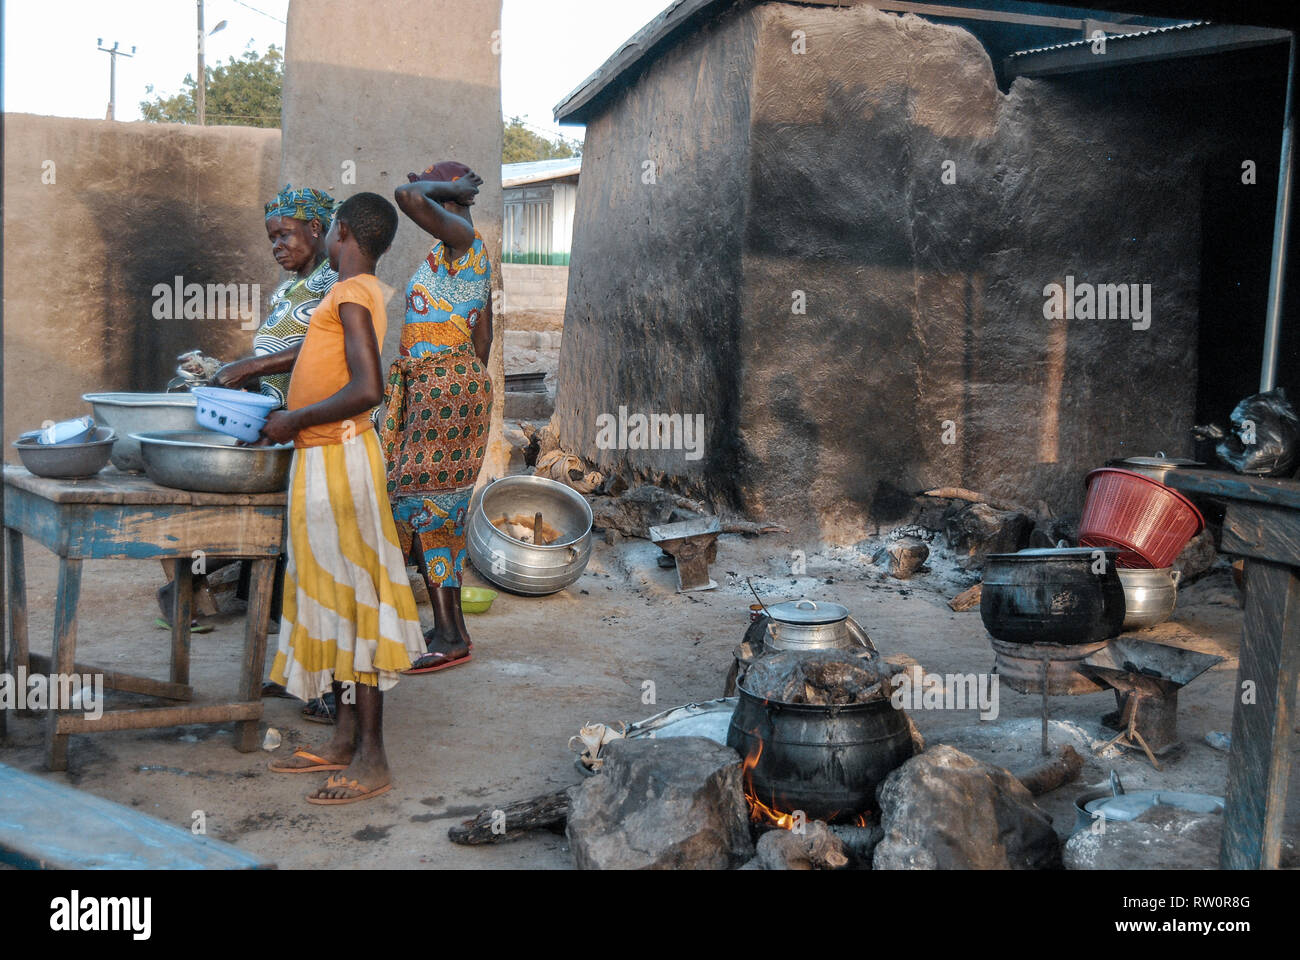 Women of a Ghanaian family are cooking a meal together in a traditional kitchen of a house in rural Ghana Stock Photo